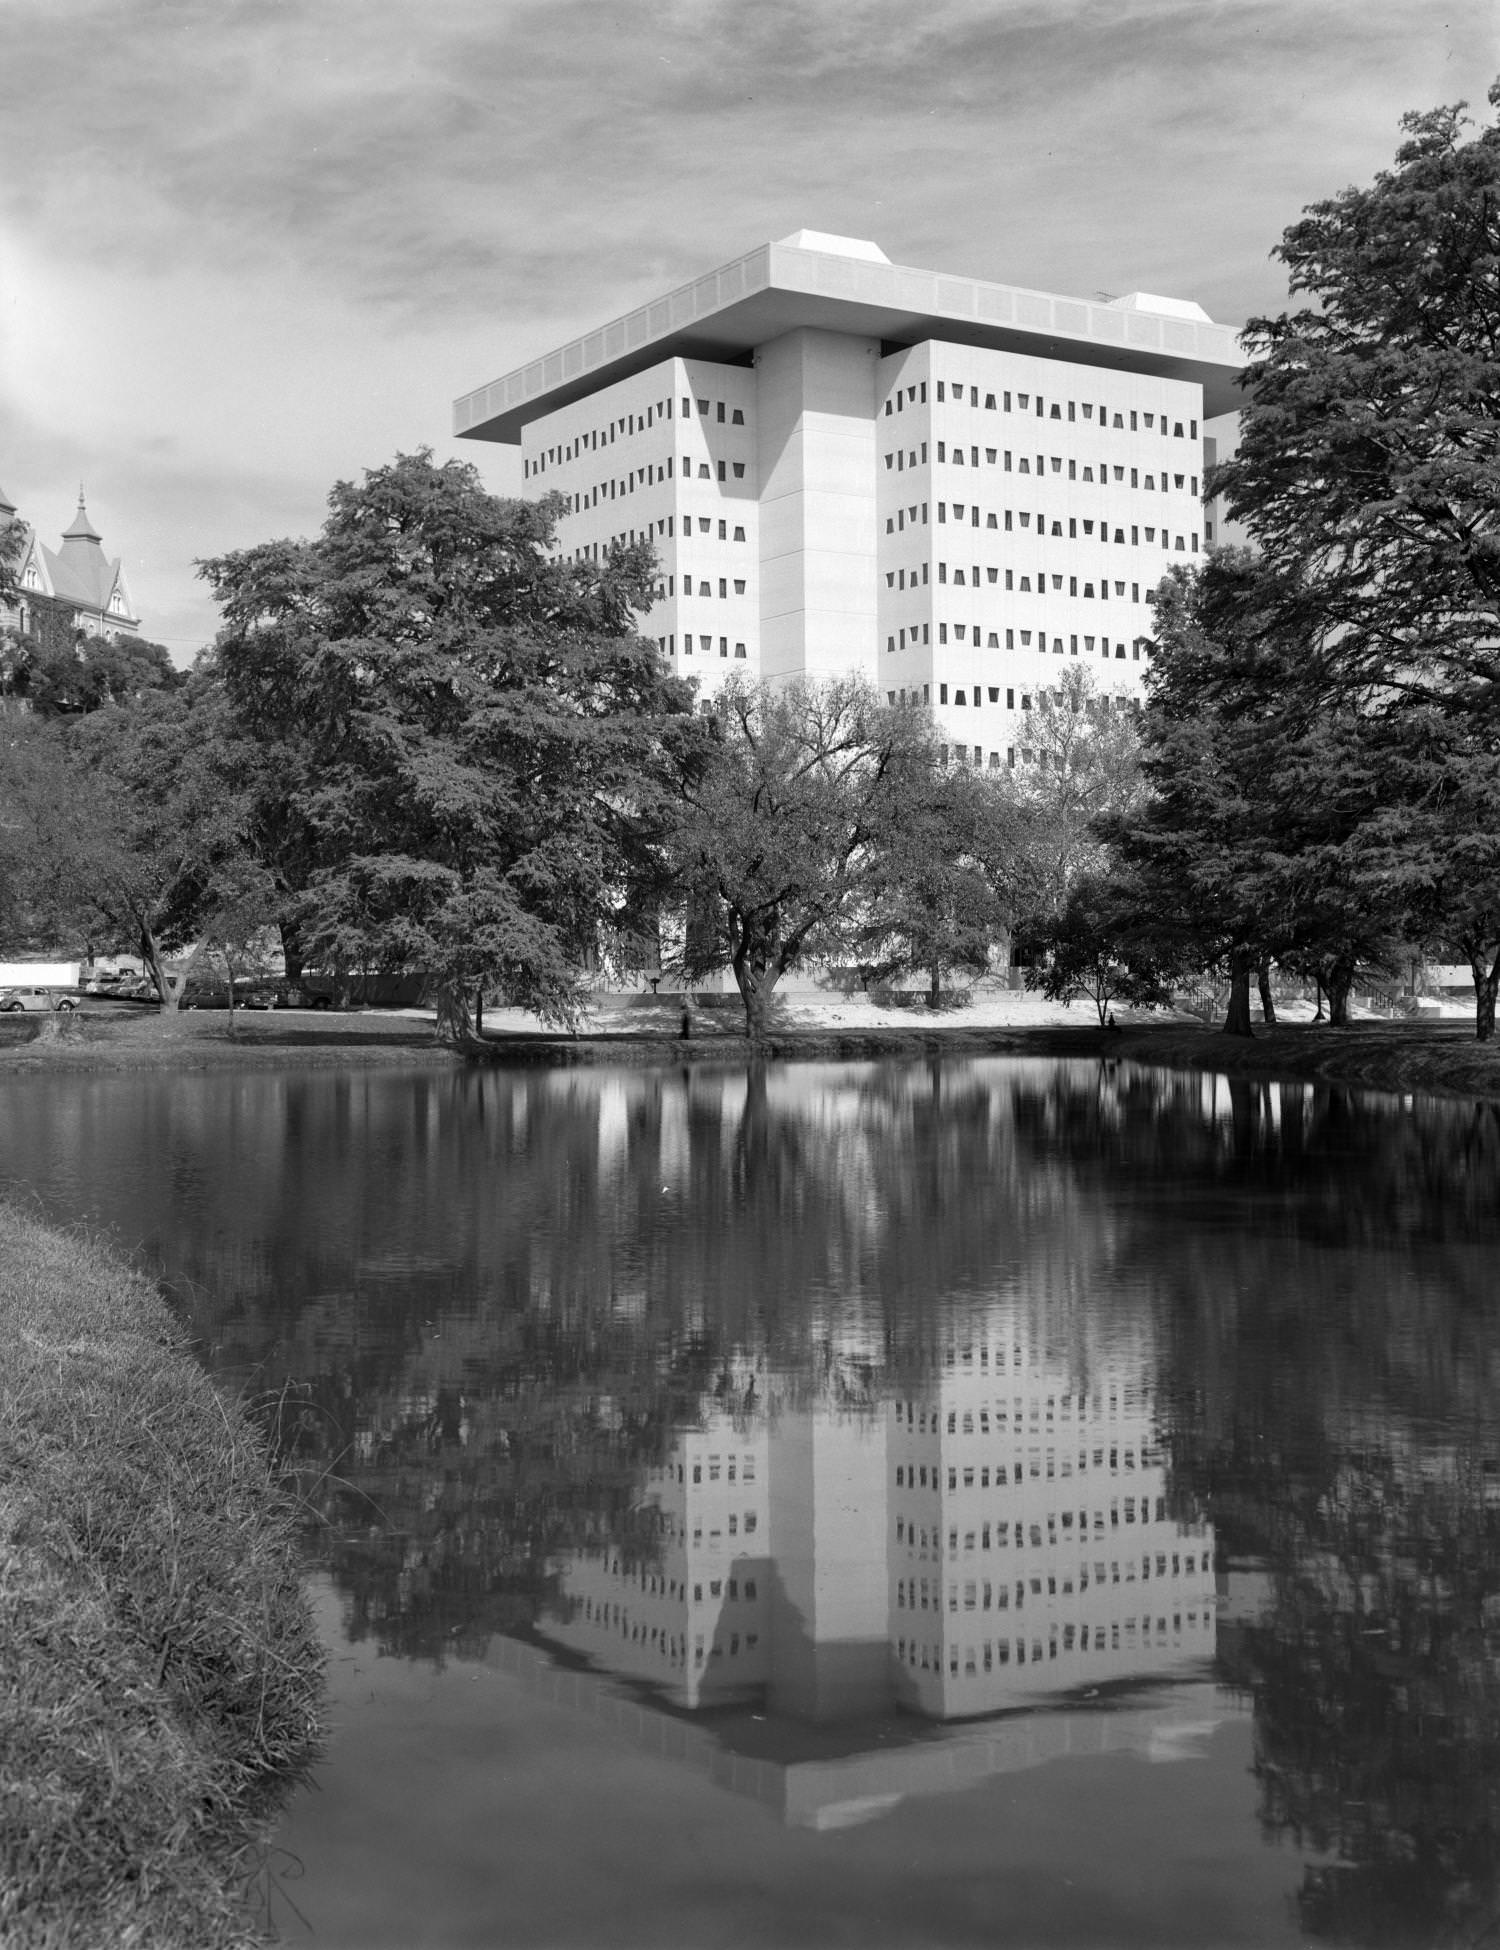 A pond surrounded by trees near a tall, postwar building, 1969